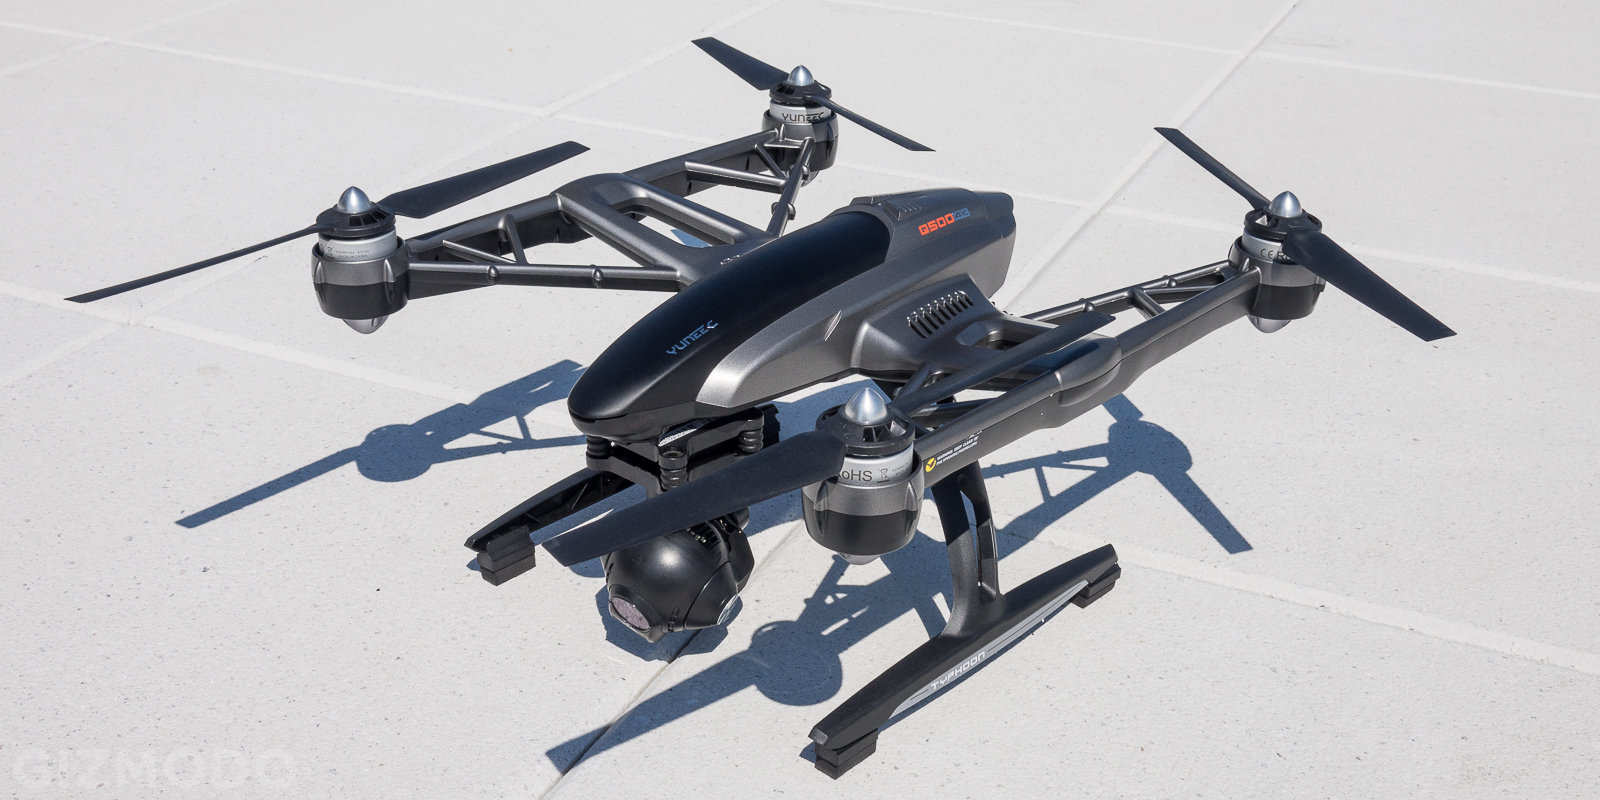 Yuneec Typhoon Q500 4K Review: This Is My New Favourite Drone